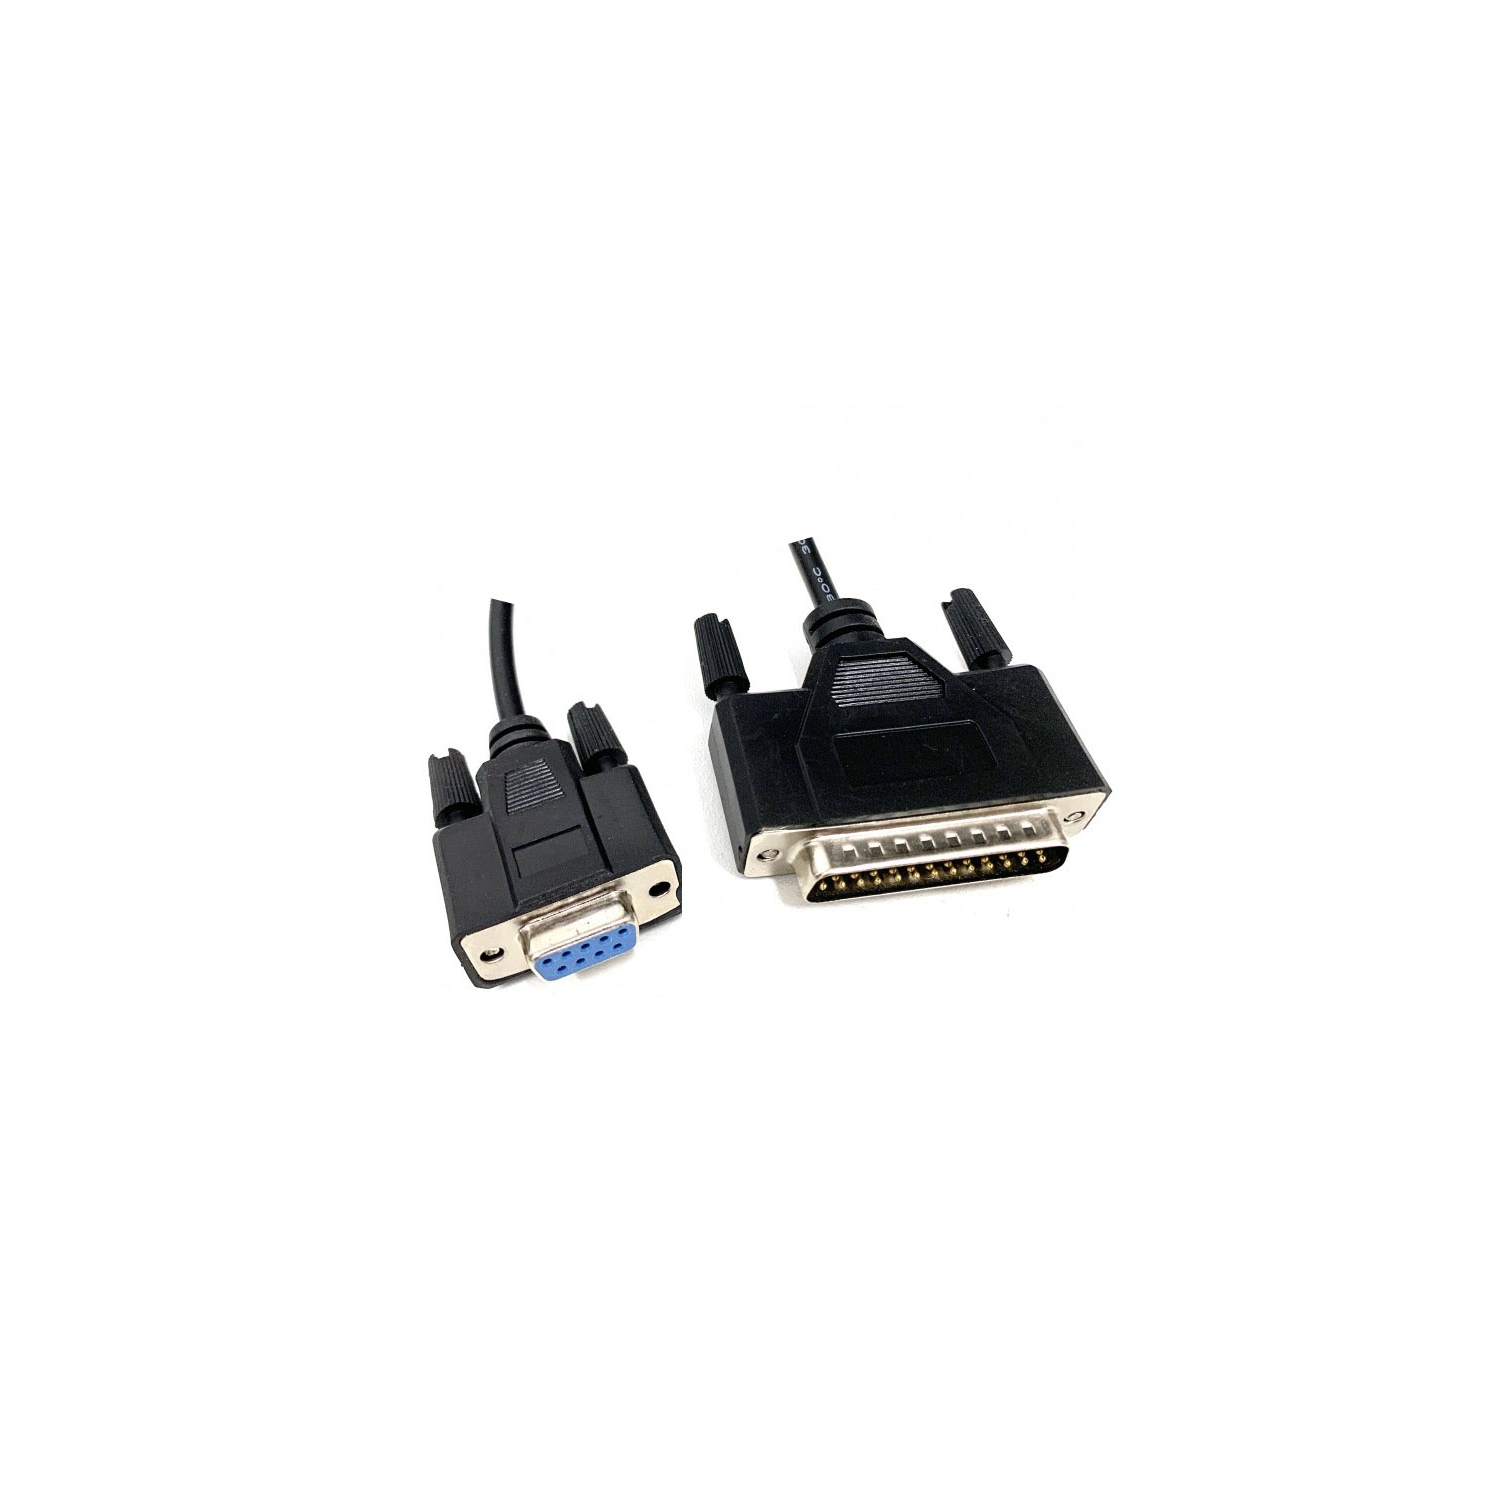 Free Shipping! HYFAI DB9 Female to DB25 Male Null-Modem Serial Port Com RS232 Cable Cord - 25 ft